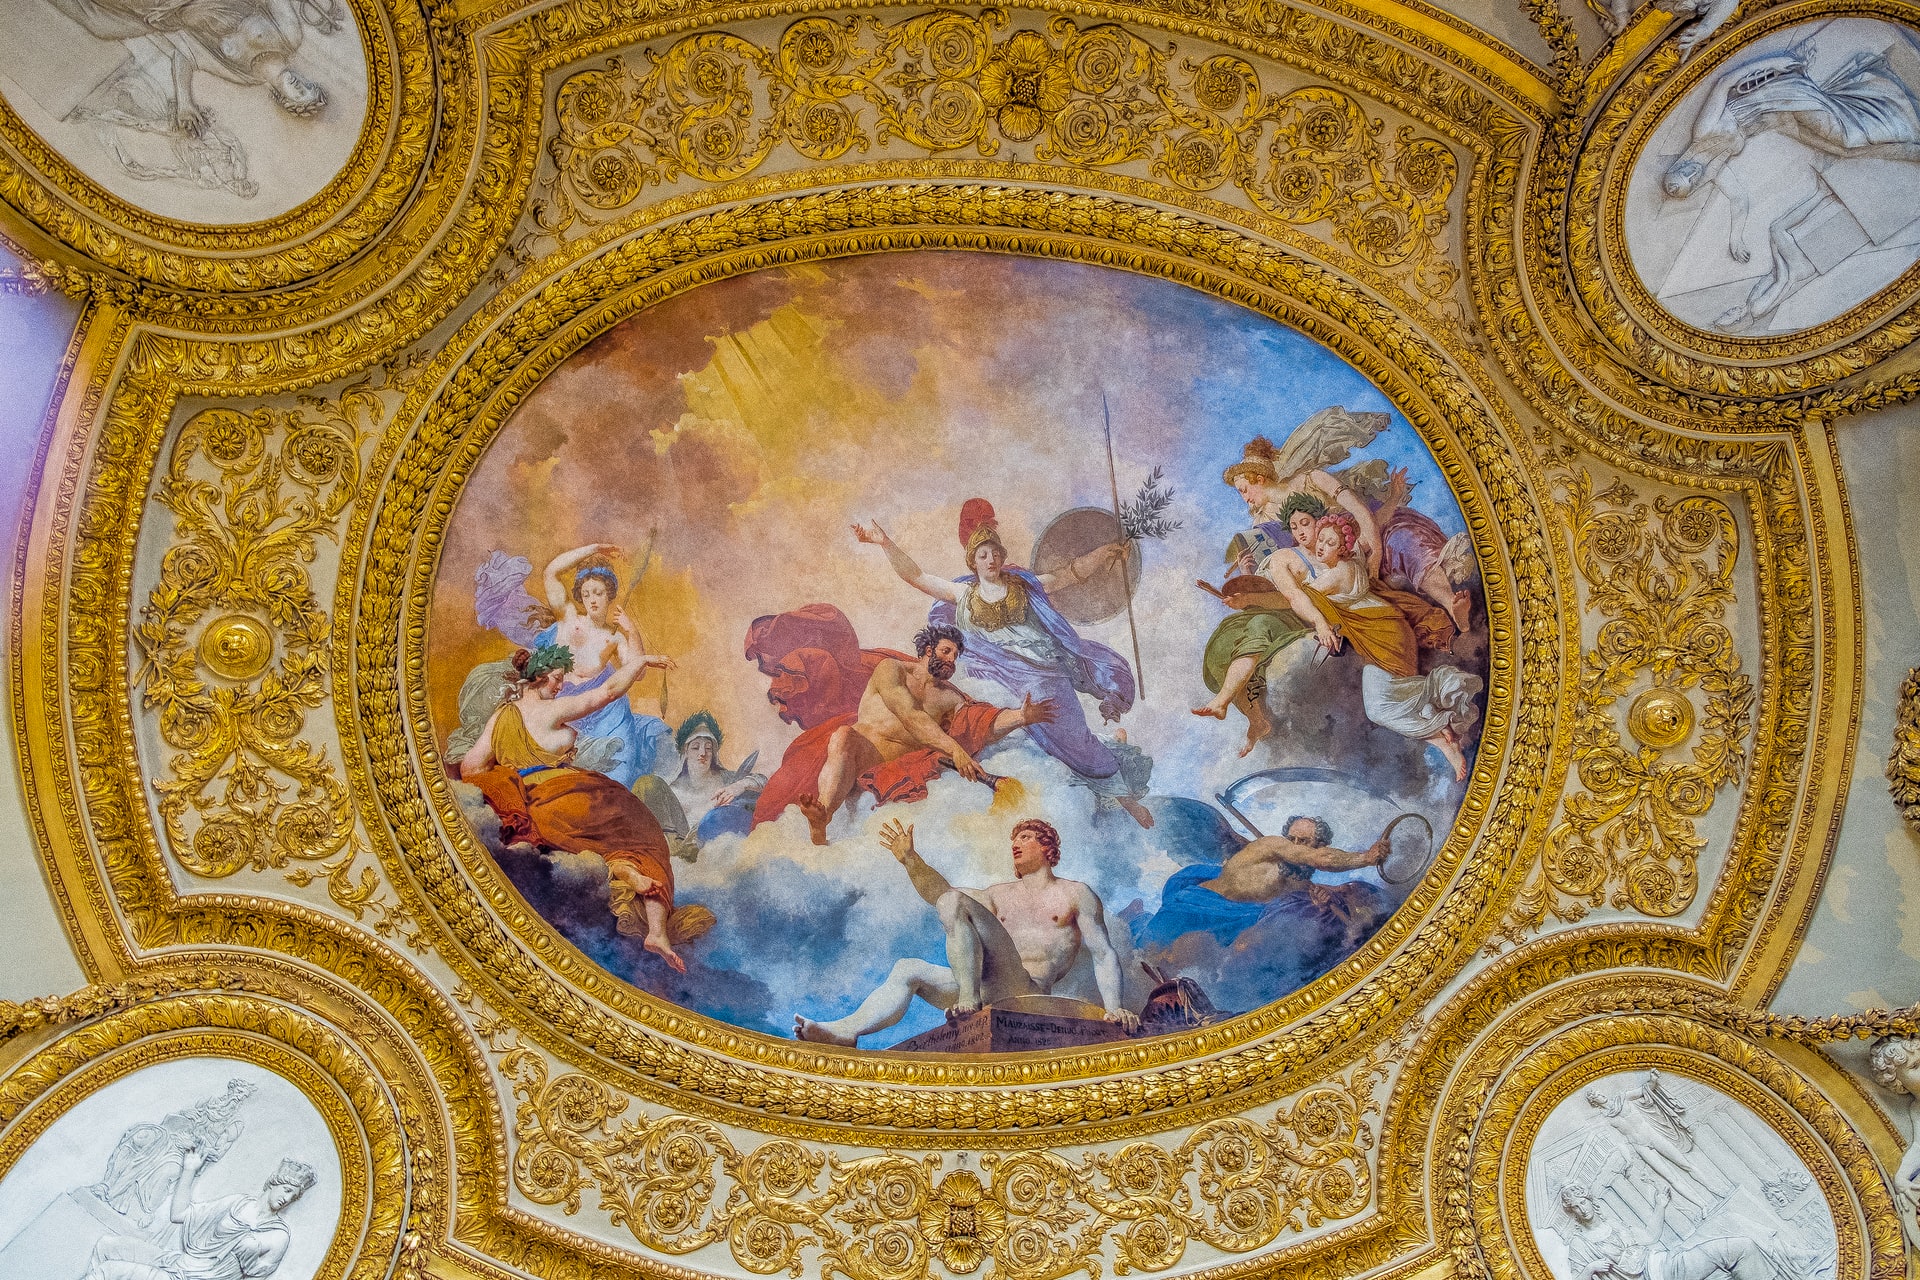 Painted ceiling inside the Louvre